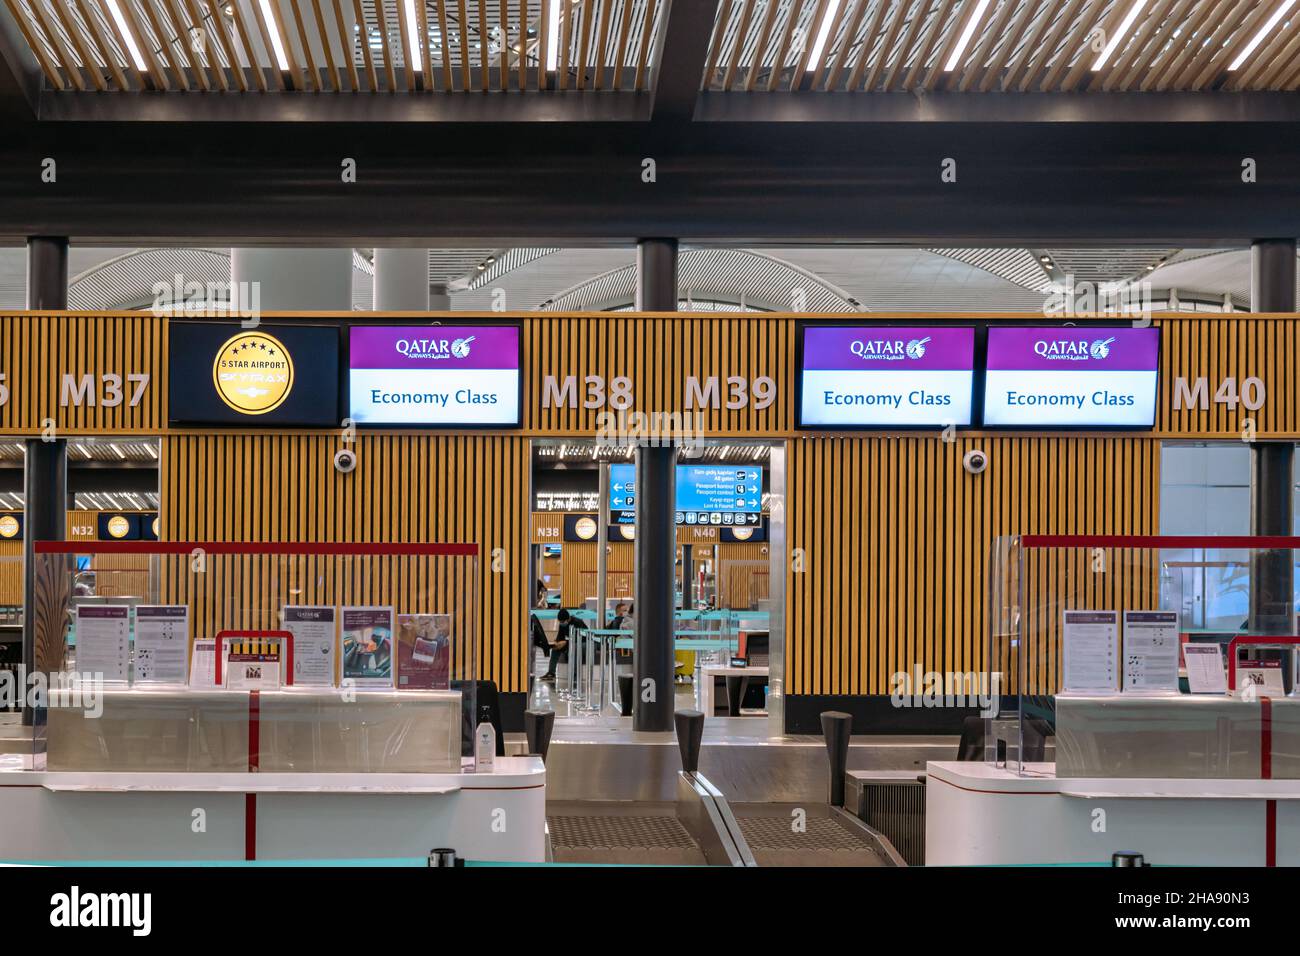 Istanbul, Turkey - November 2021: Qatar Airways check-in counter in Istanbul airport. Qatar Airways is one of the largest airlines in the Middle East. Stock Photo